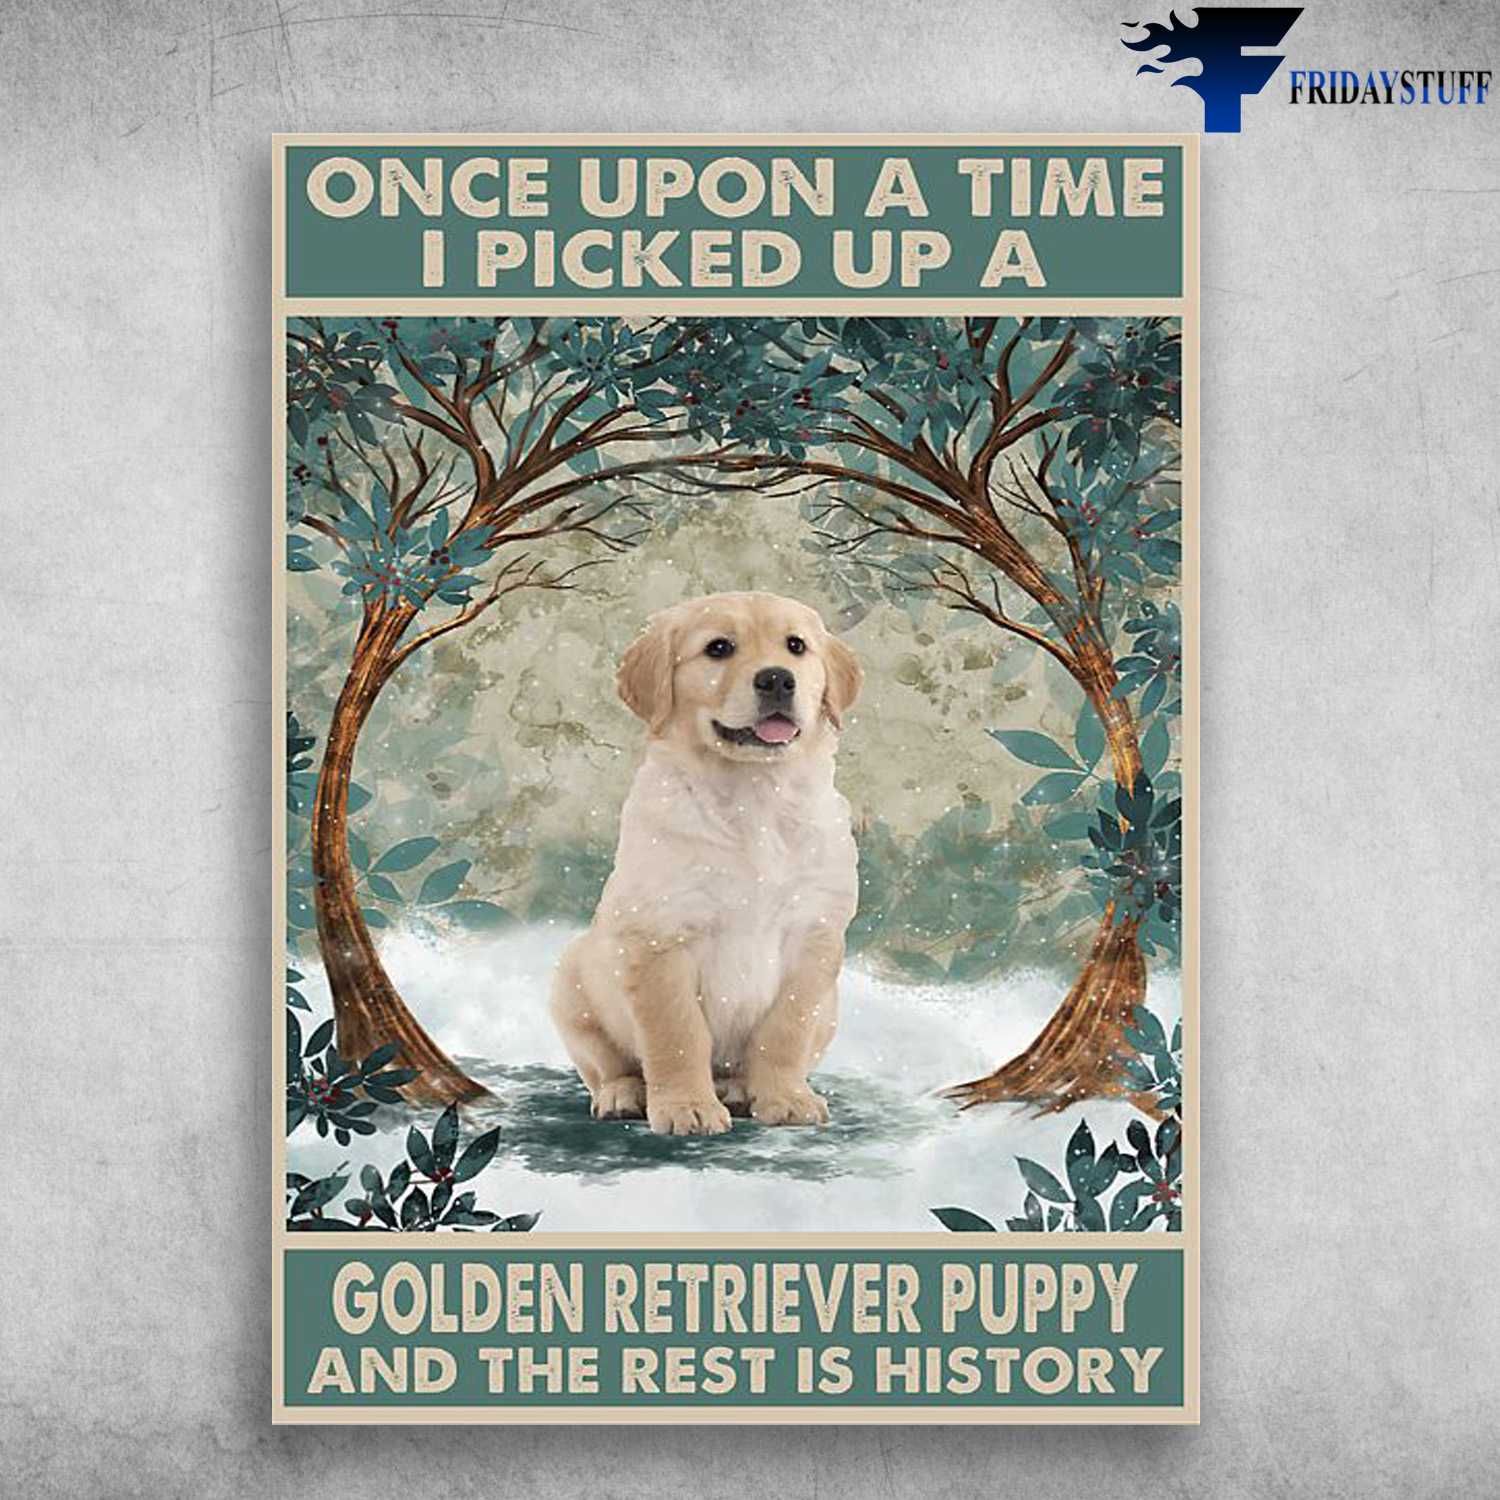 Golden Retriever Dog - One Upon A Time, There Was A Golden Retriever Puppy, And The Rest Is History